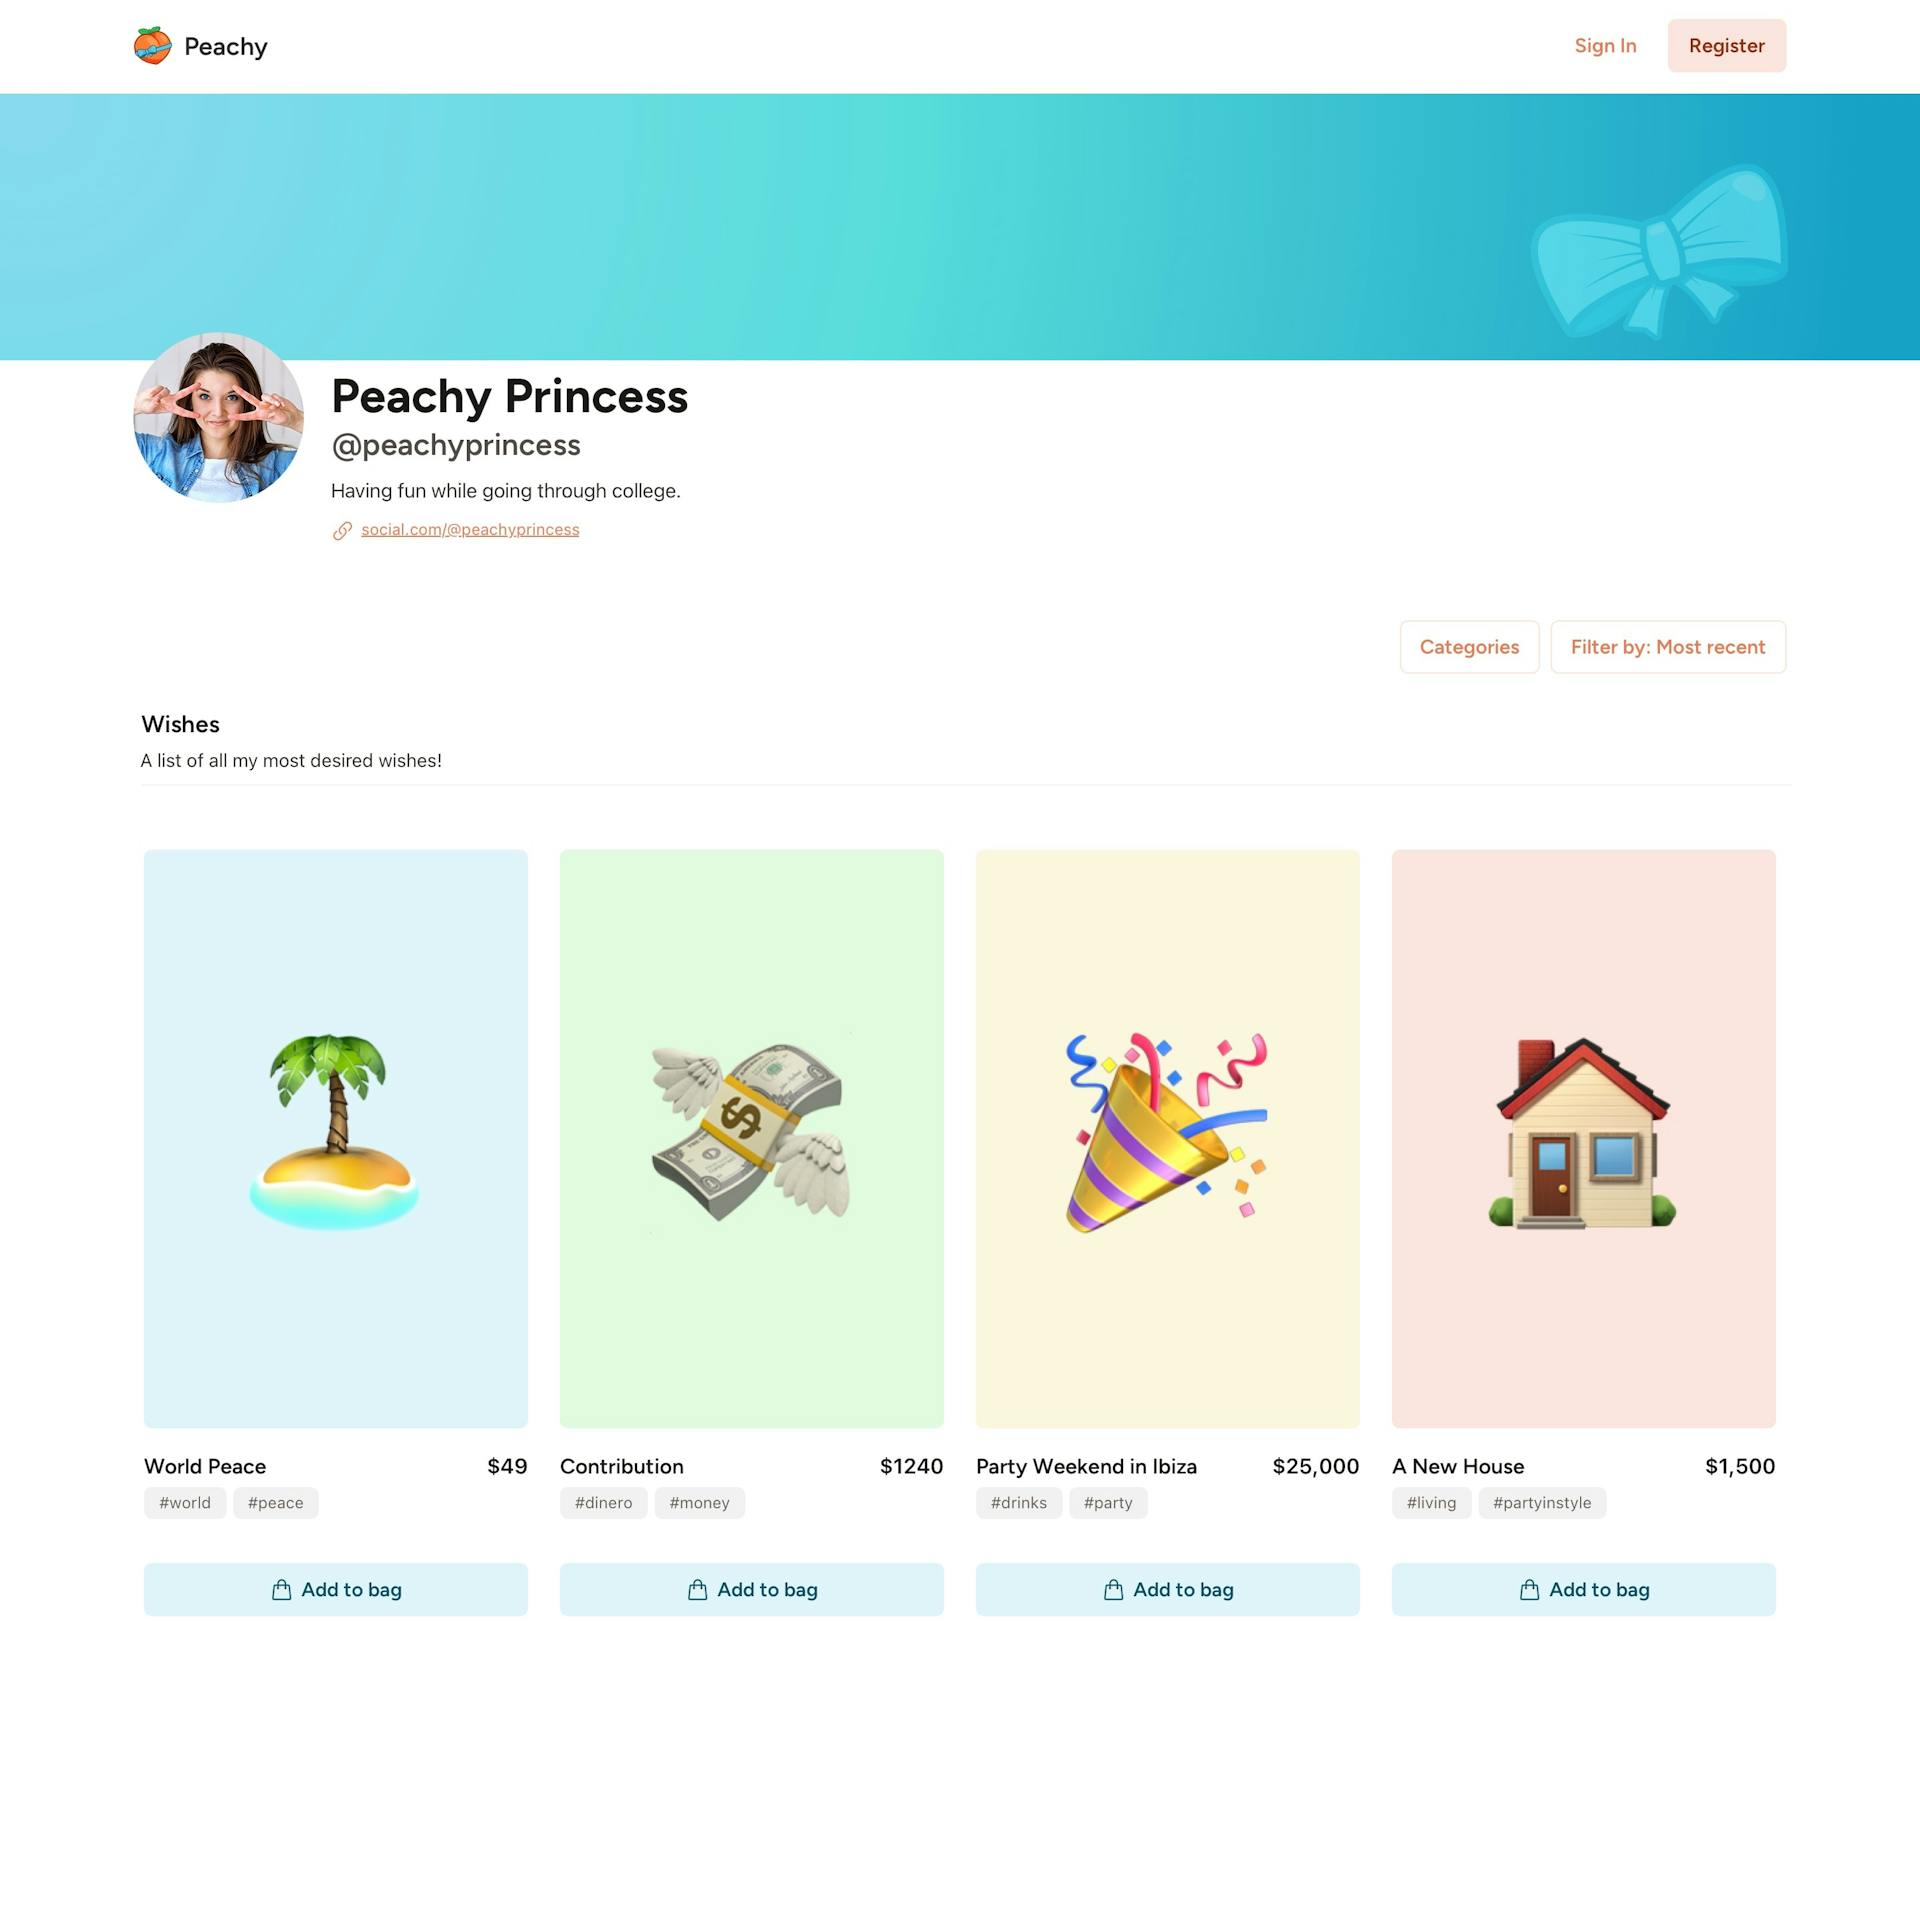 A profile page viewed as a creator with wish lists and wishes insides those lists